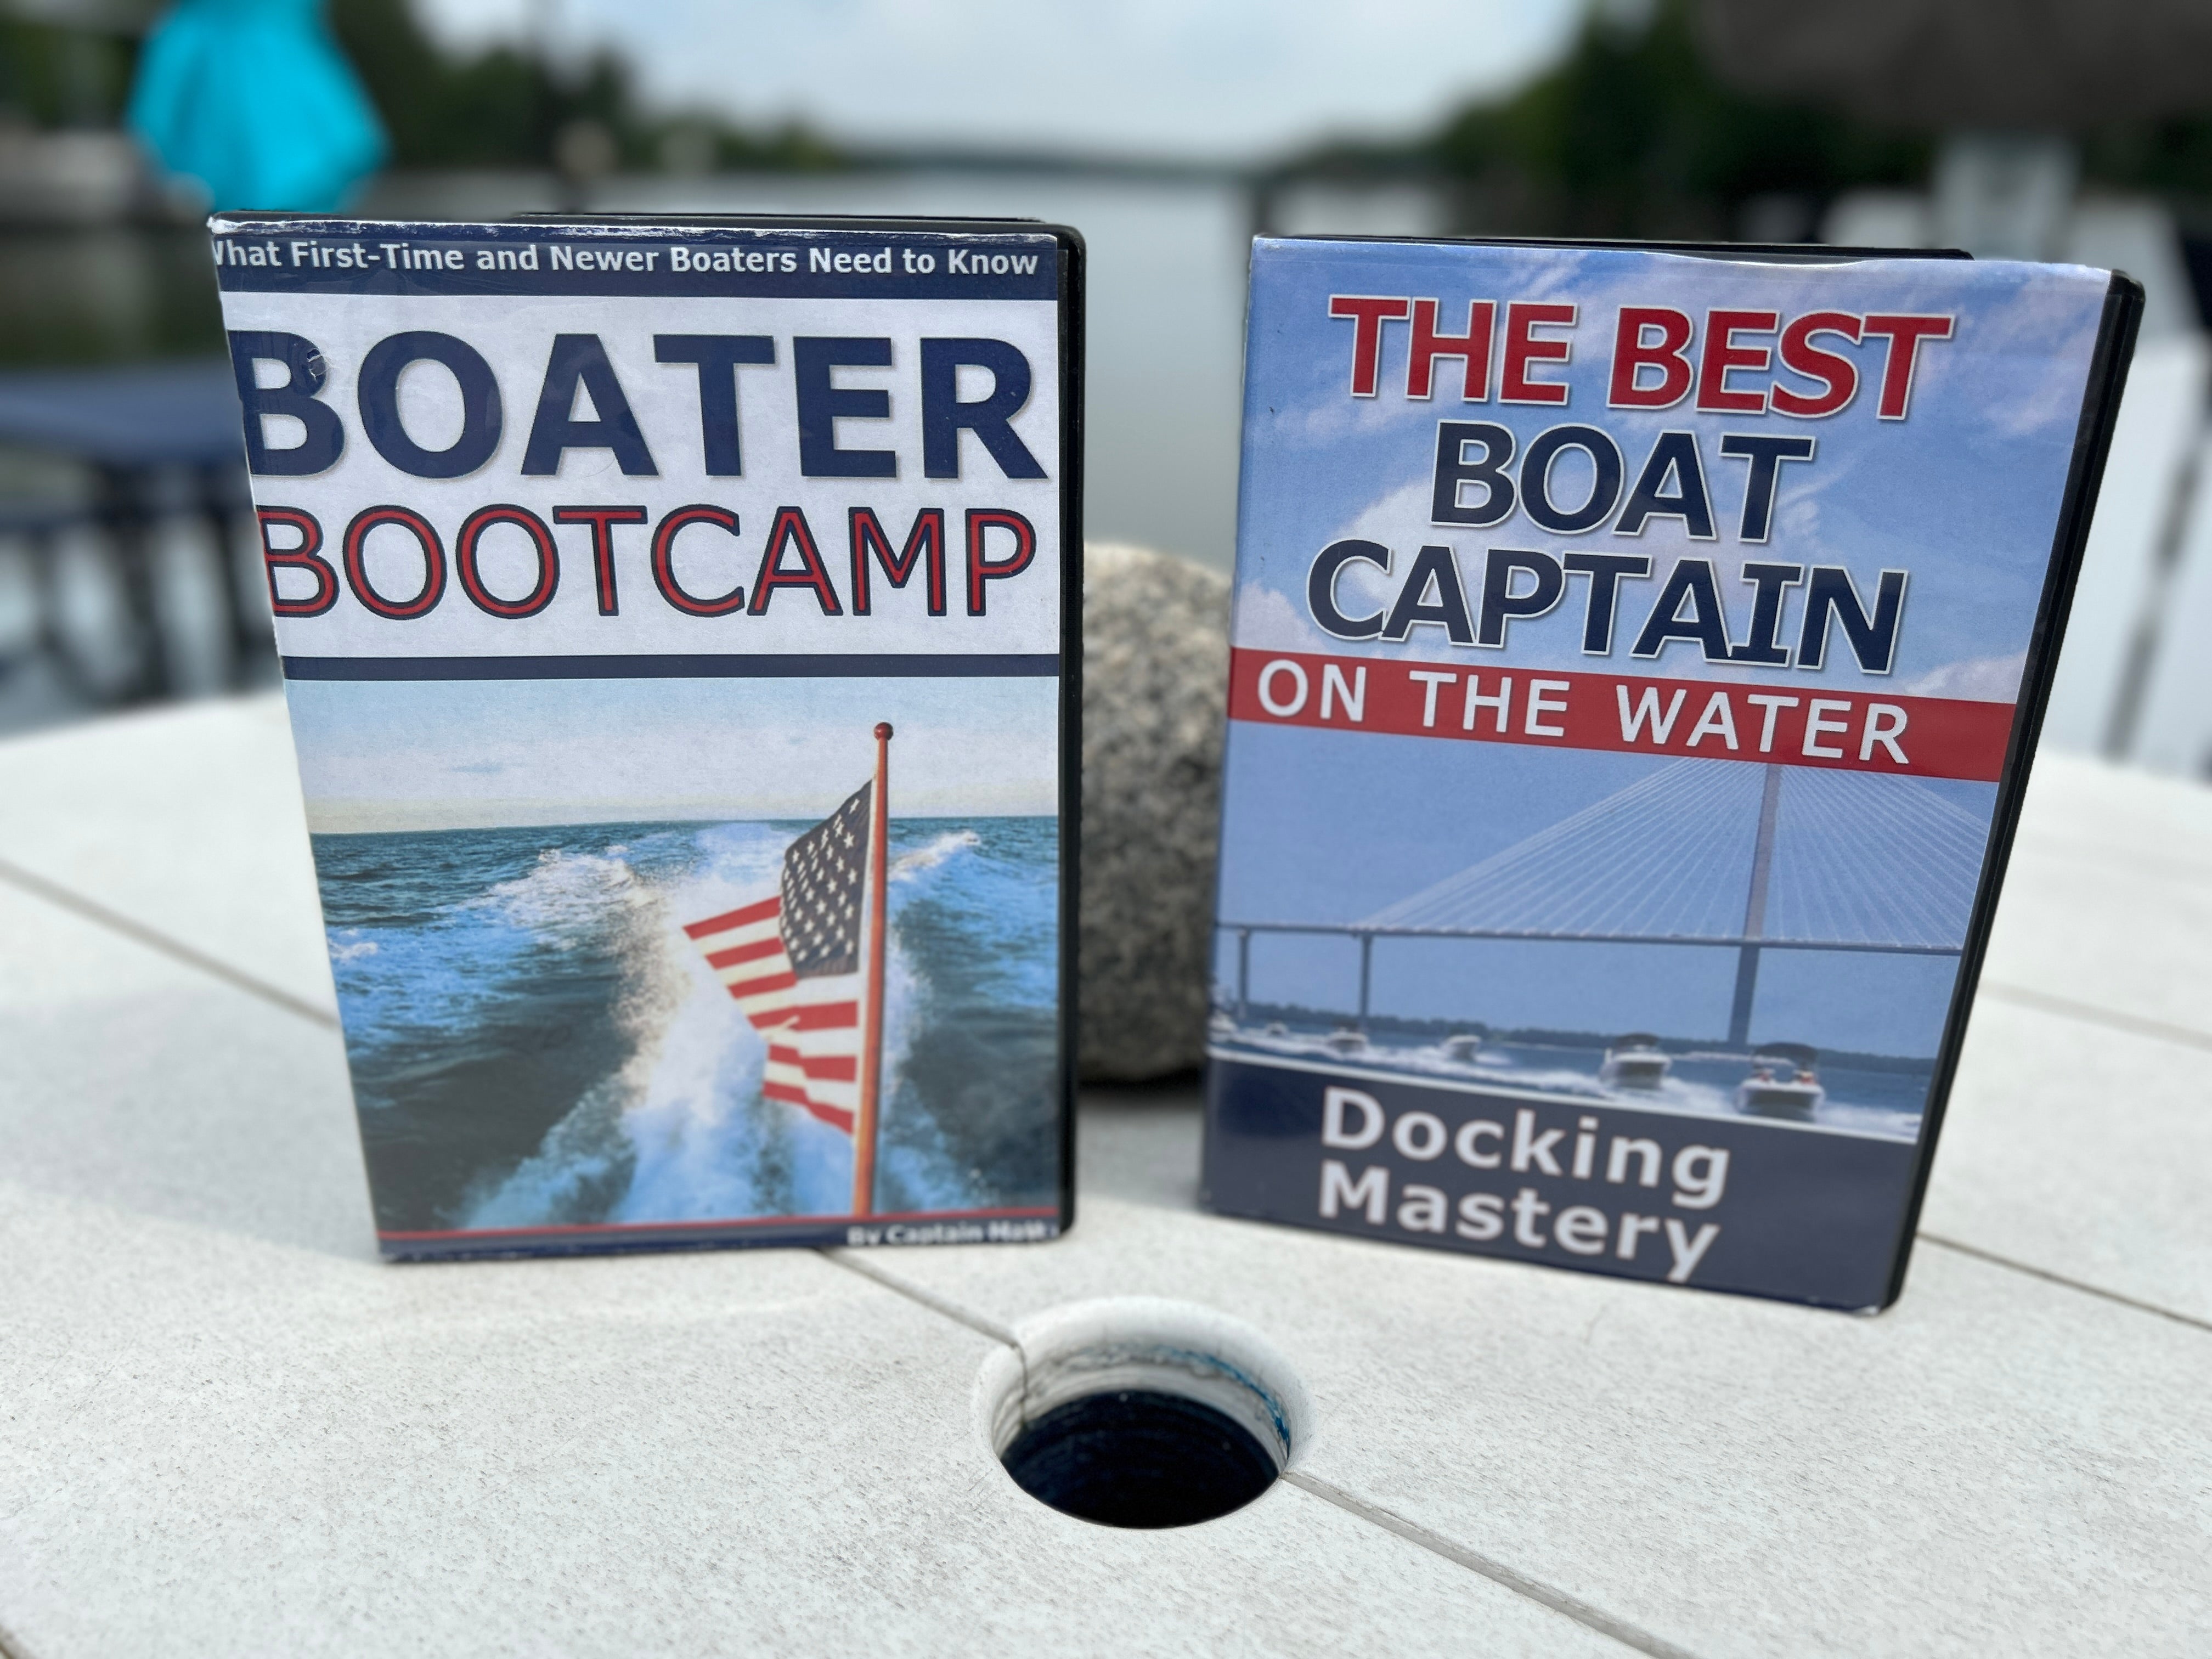 Our Training Programs (Boater Bootcamp, Best Boat Captain, Trailer Like a Pro, Confident Coastal Boater & Boat Buyer's Academy)